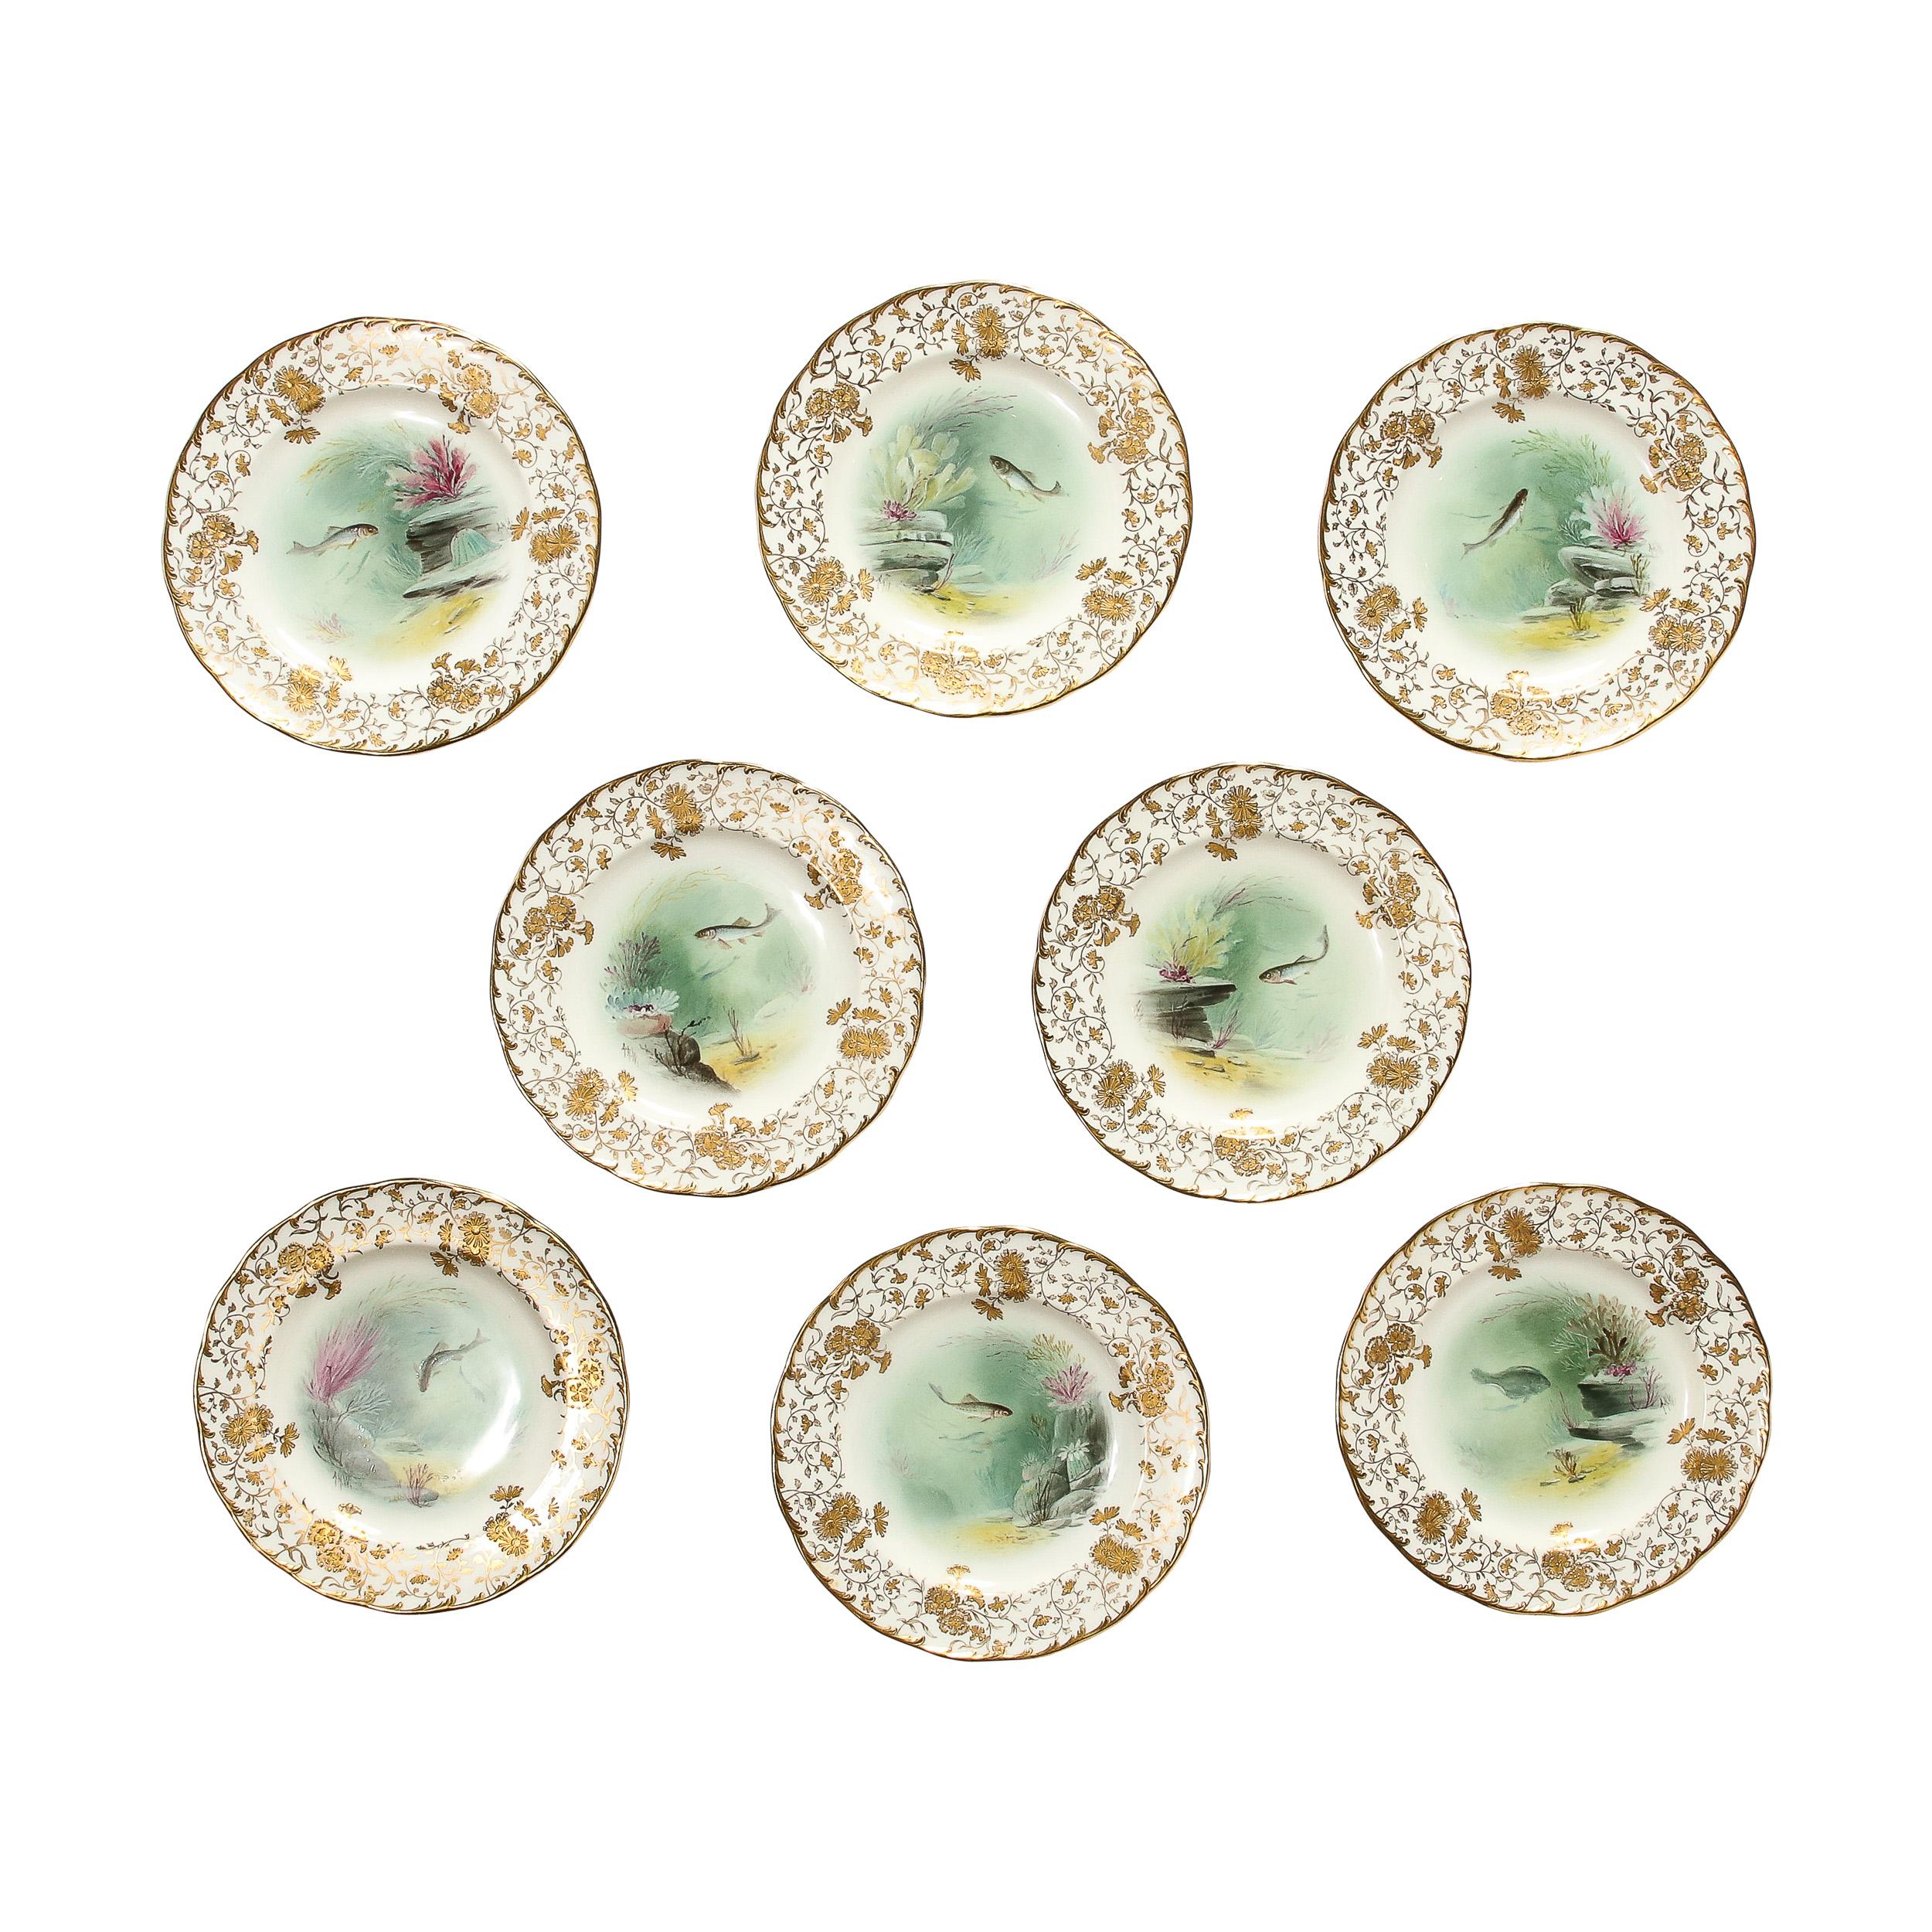 This exquisite  and beautifully made set of Eight Hand-Painted Minton Porcelain Plates Depicting Fish signed A. Holland originate from England, Circa 1900. The border of each plate features beautifully rendered gilded floral motifs, spiraling around